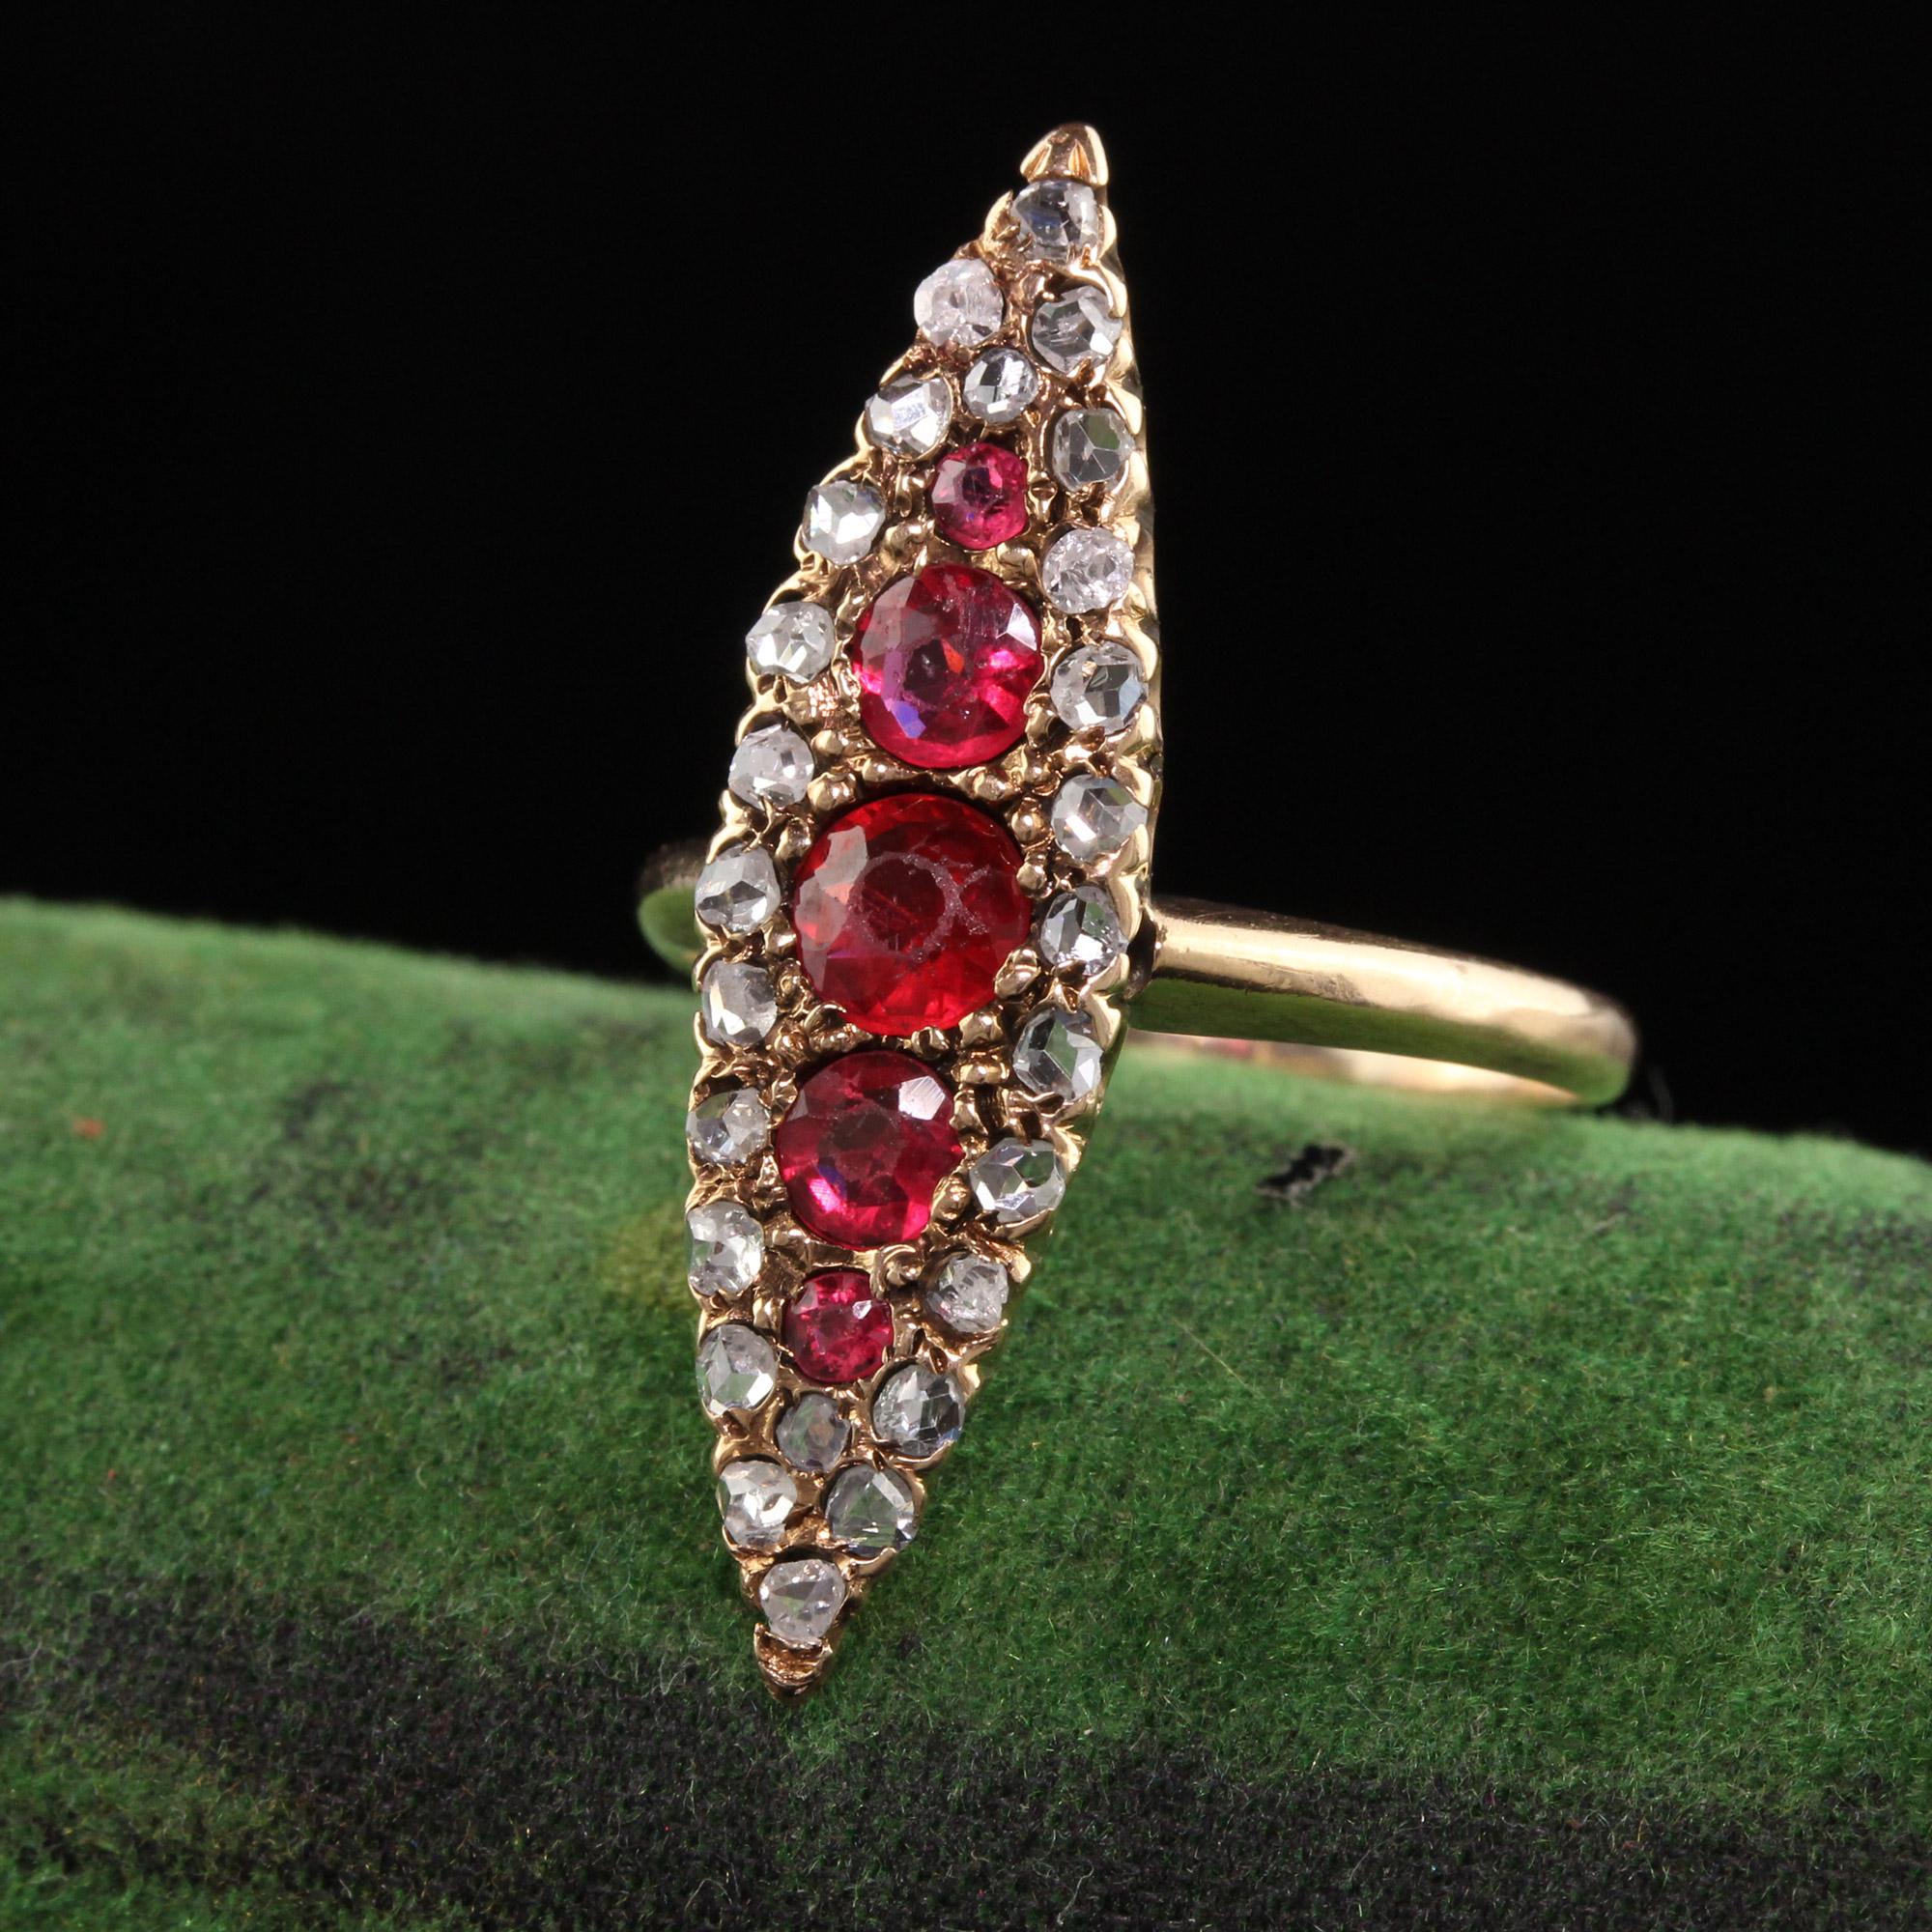 Beautiful Antique Victorian 14K Yellow Gold Ruby and Rose Cut Diamond Navette Ring. This gorgeous navette shield ring has a row of synthetic rubies in the center surrounded by rose cut diamonds set in 14K yellow gold.

Item #R1008

Metal: 14K Yellow